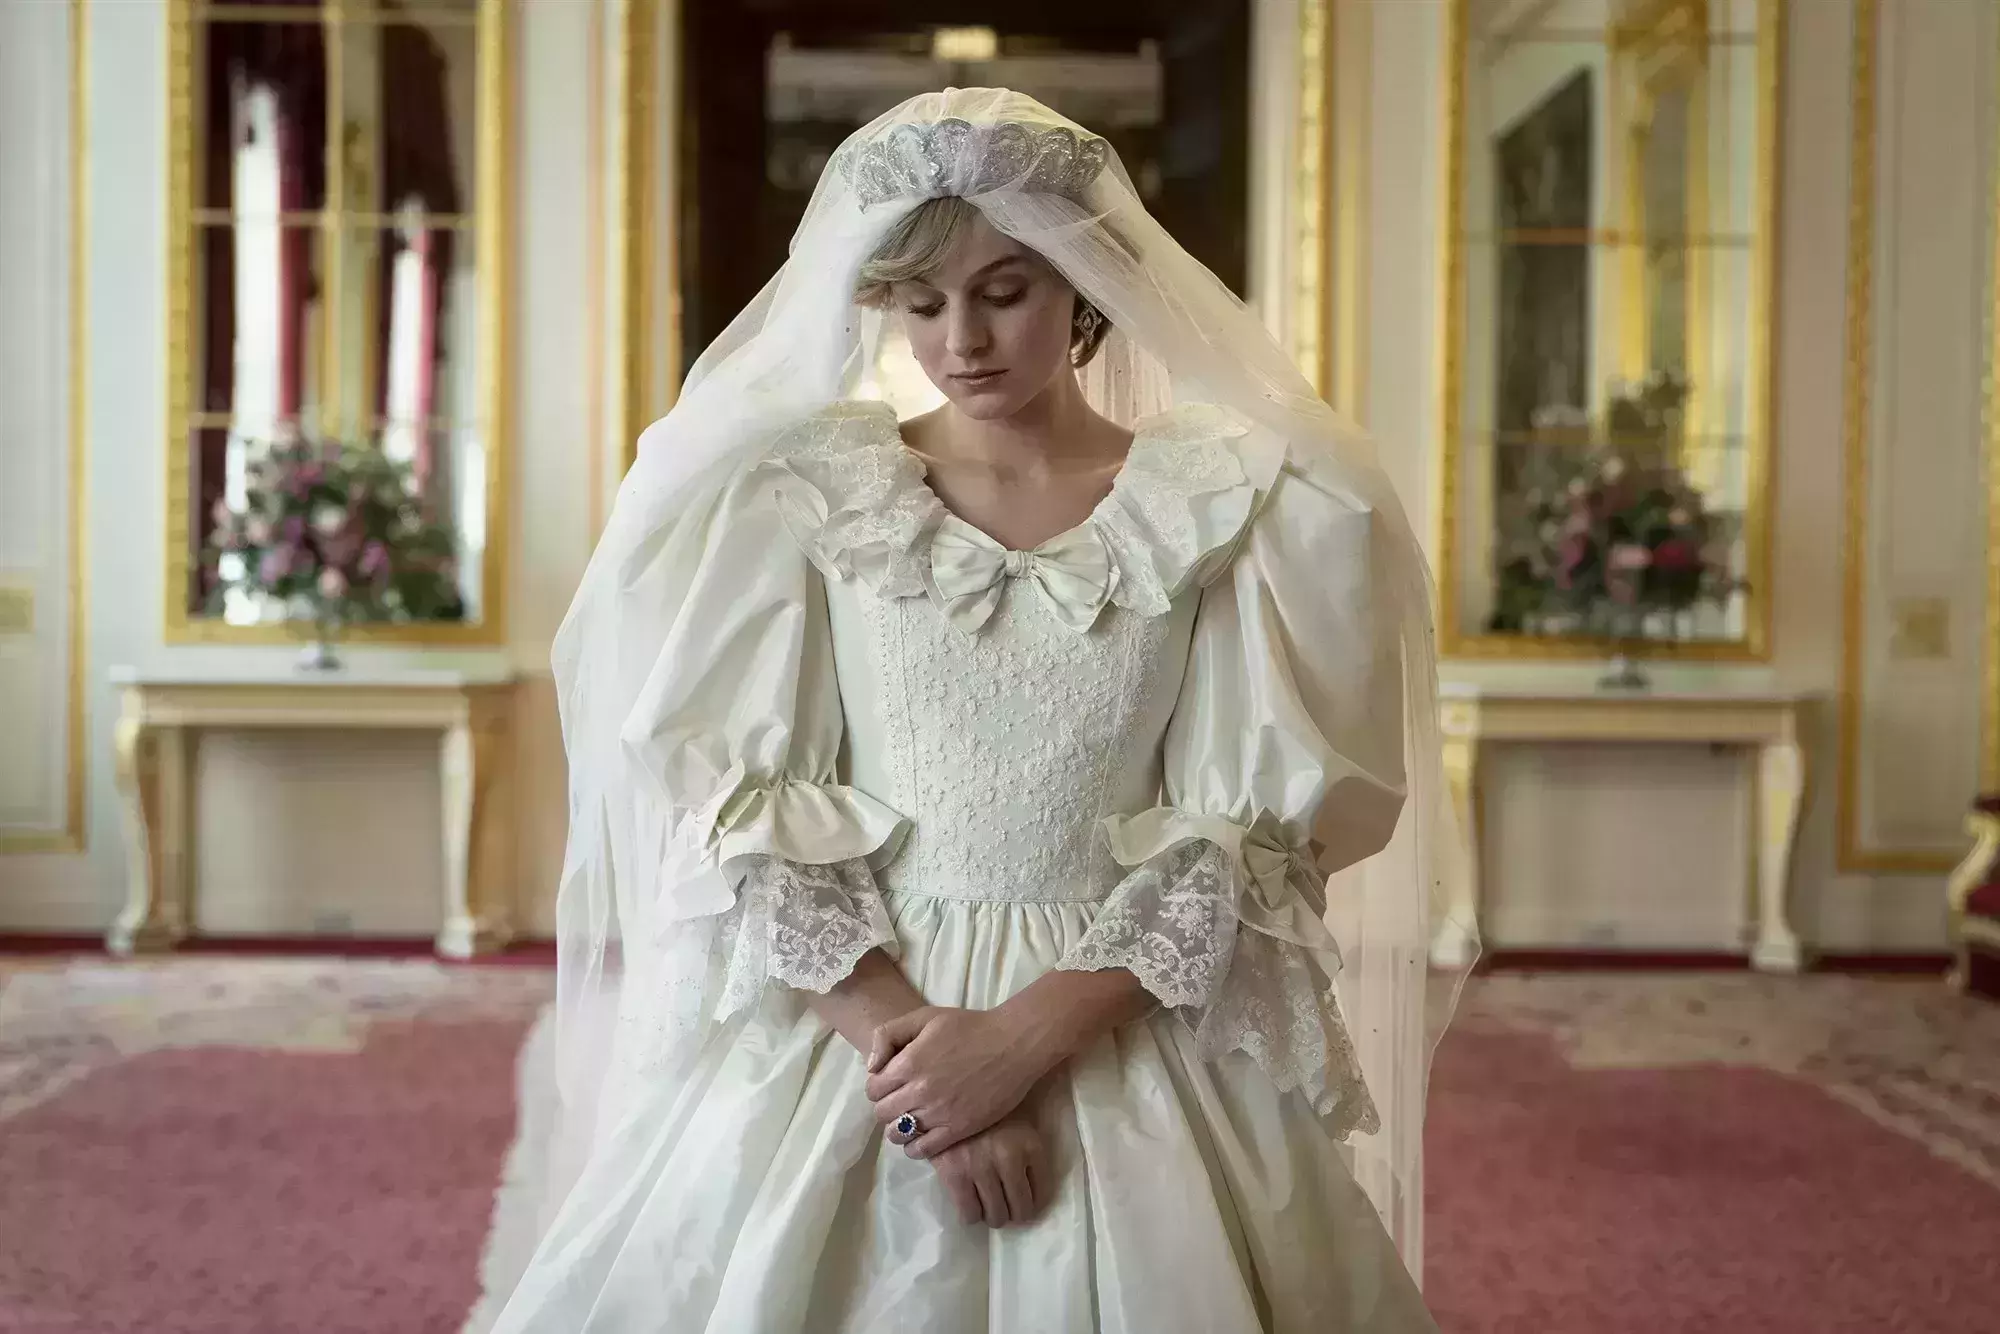 Princess Dianas death will be handled sensitively in The Crown: producers